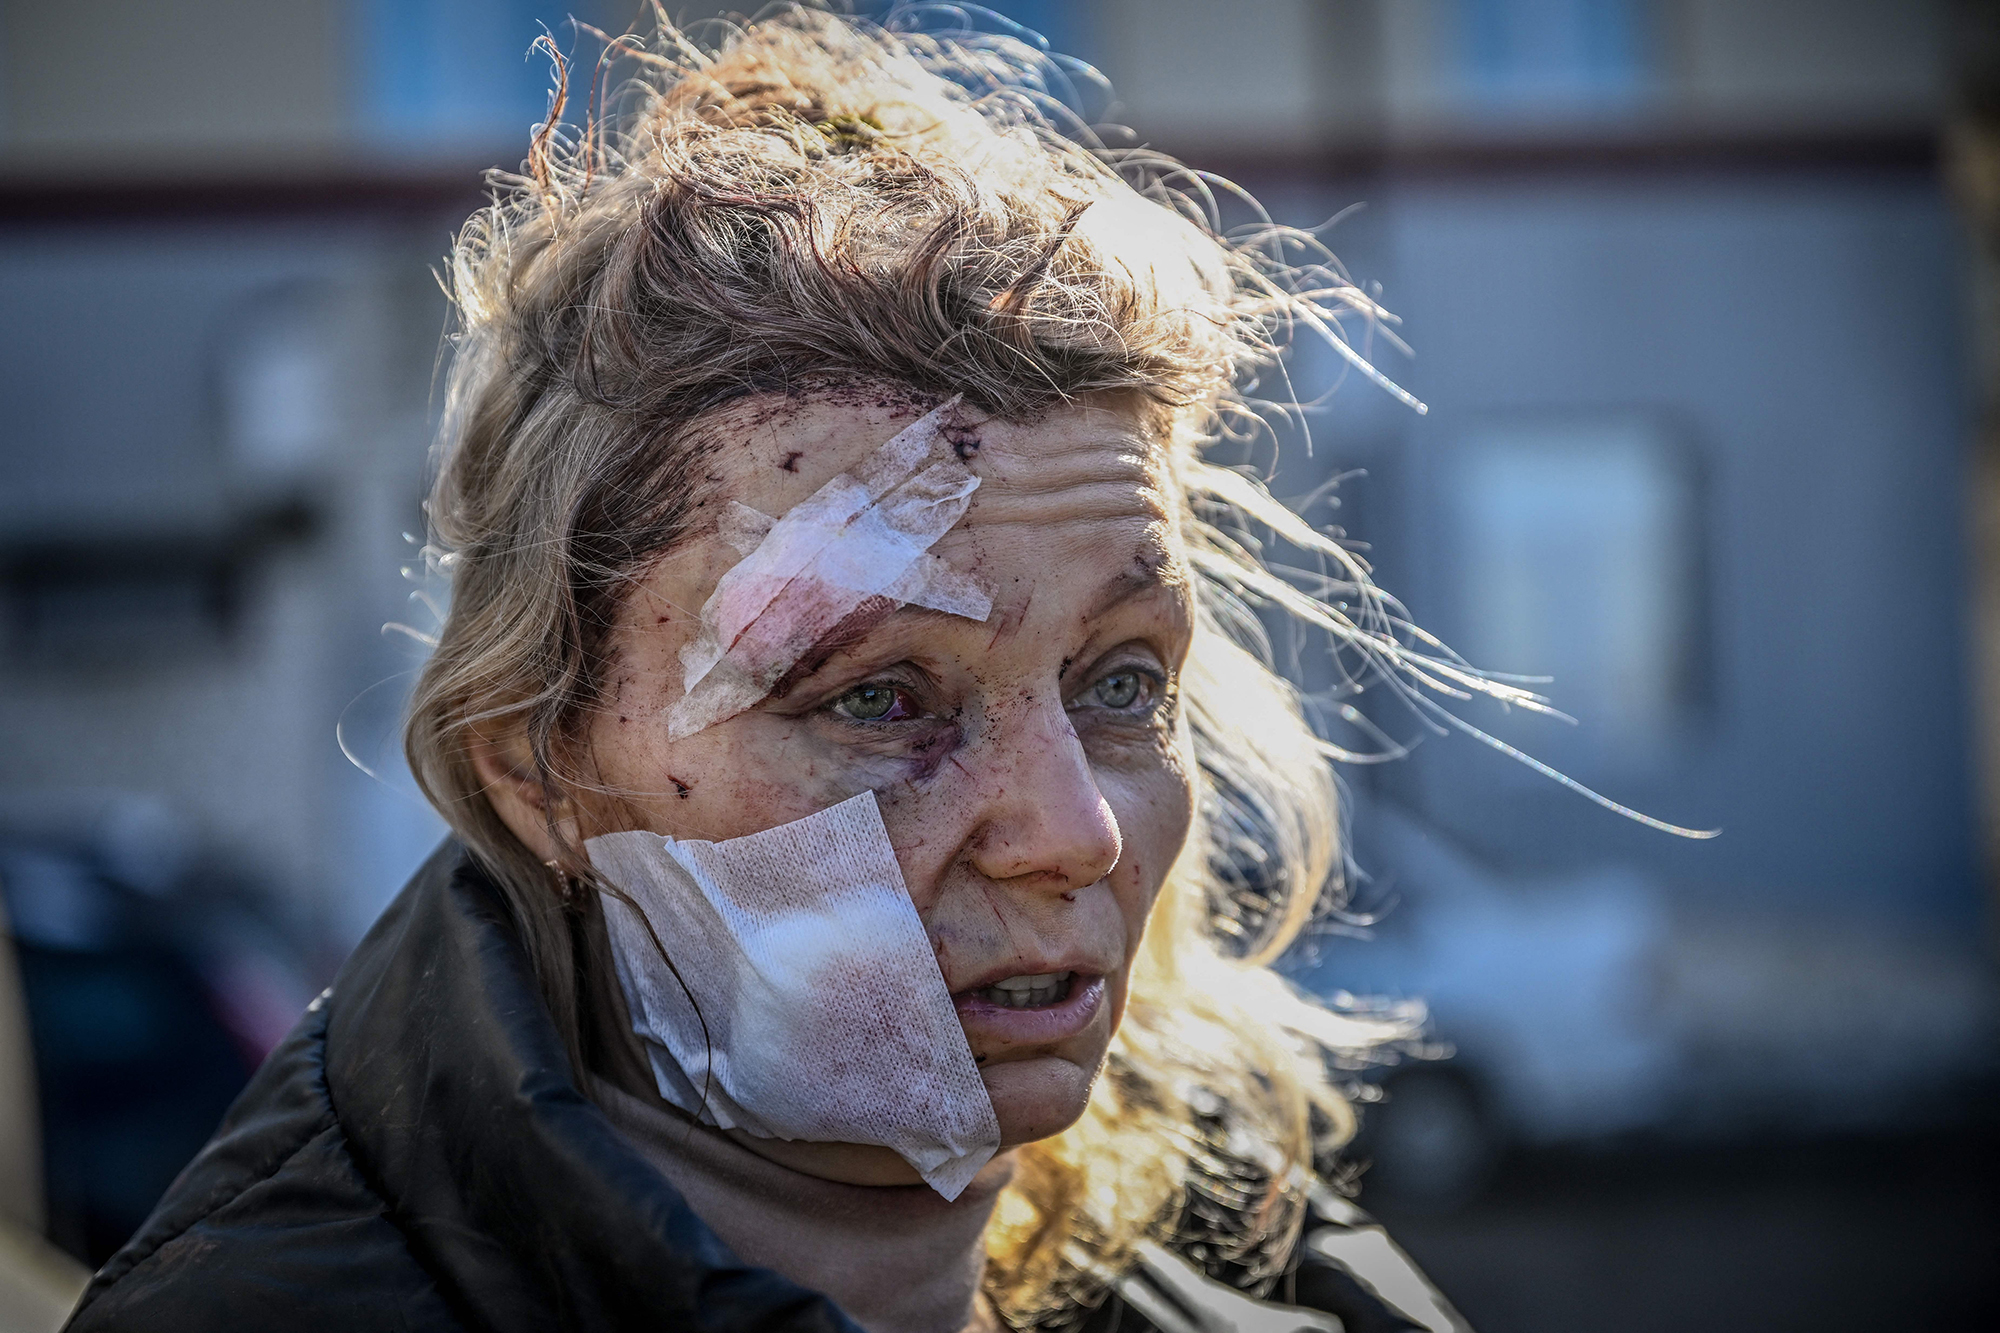 Olena Kurylo, a 52-year-old teacher, stands outside a hospital after the bombing of the eastern Ukraine town of Chuguiv on February 24.